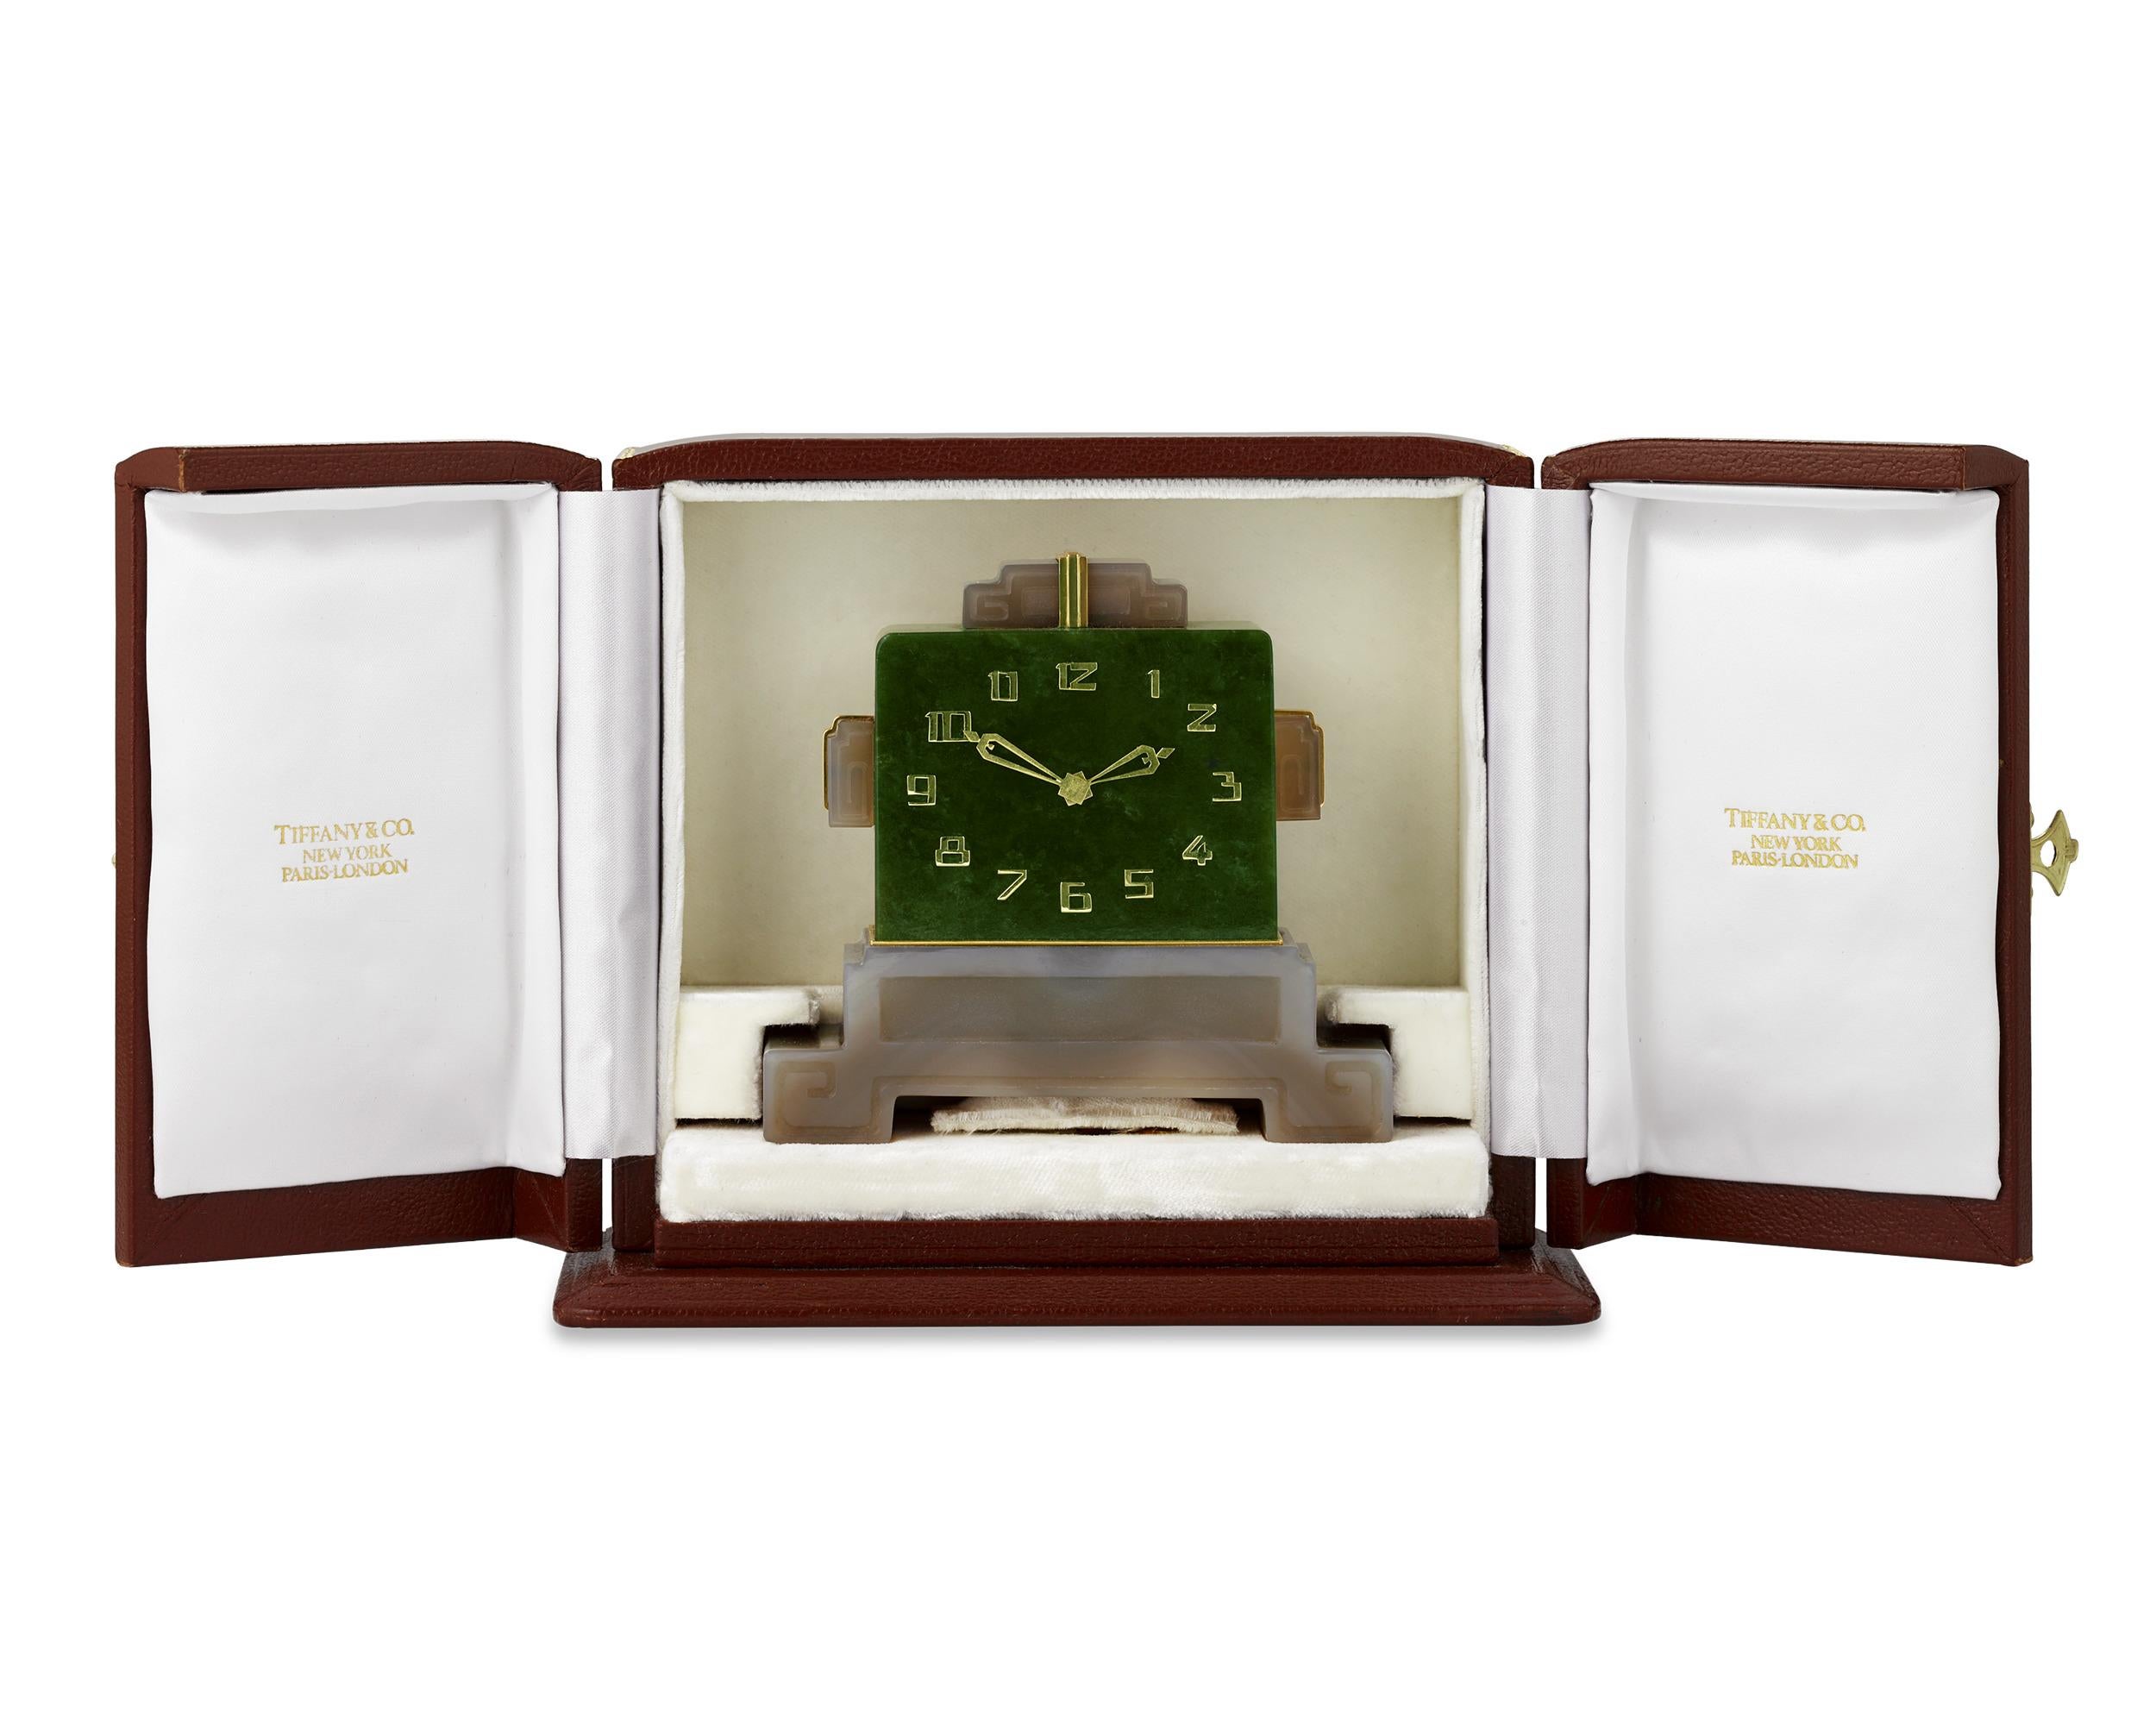 Exuding the timeless grandeur of the Art Deco period, this Tiffany & Co. France travel clock is composed of luxurious nephrite jade and quartz. The angular design of the timepiece's body incorporates squared scrolling motifs, heightening the